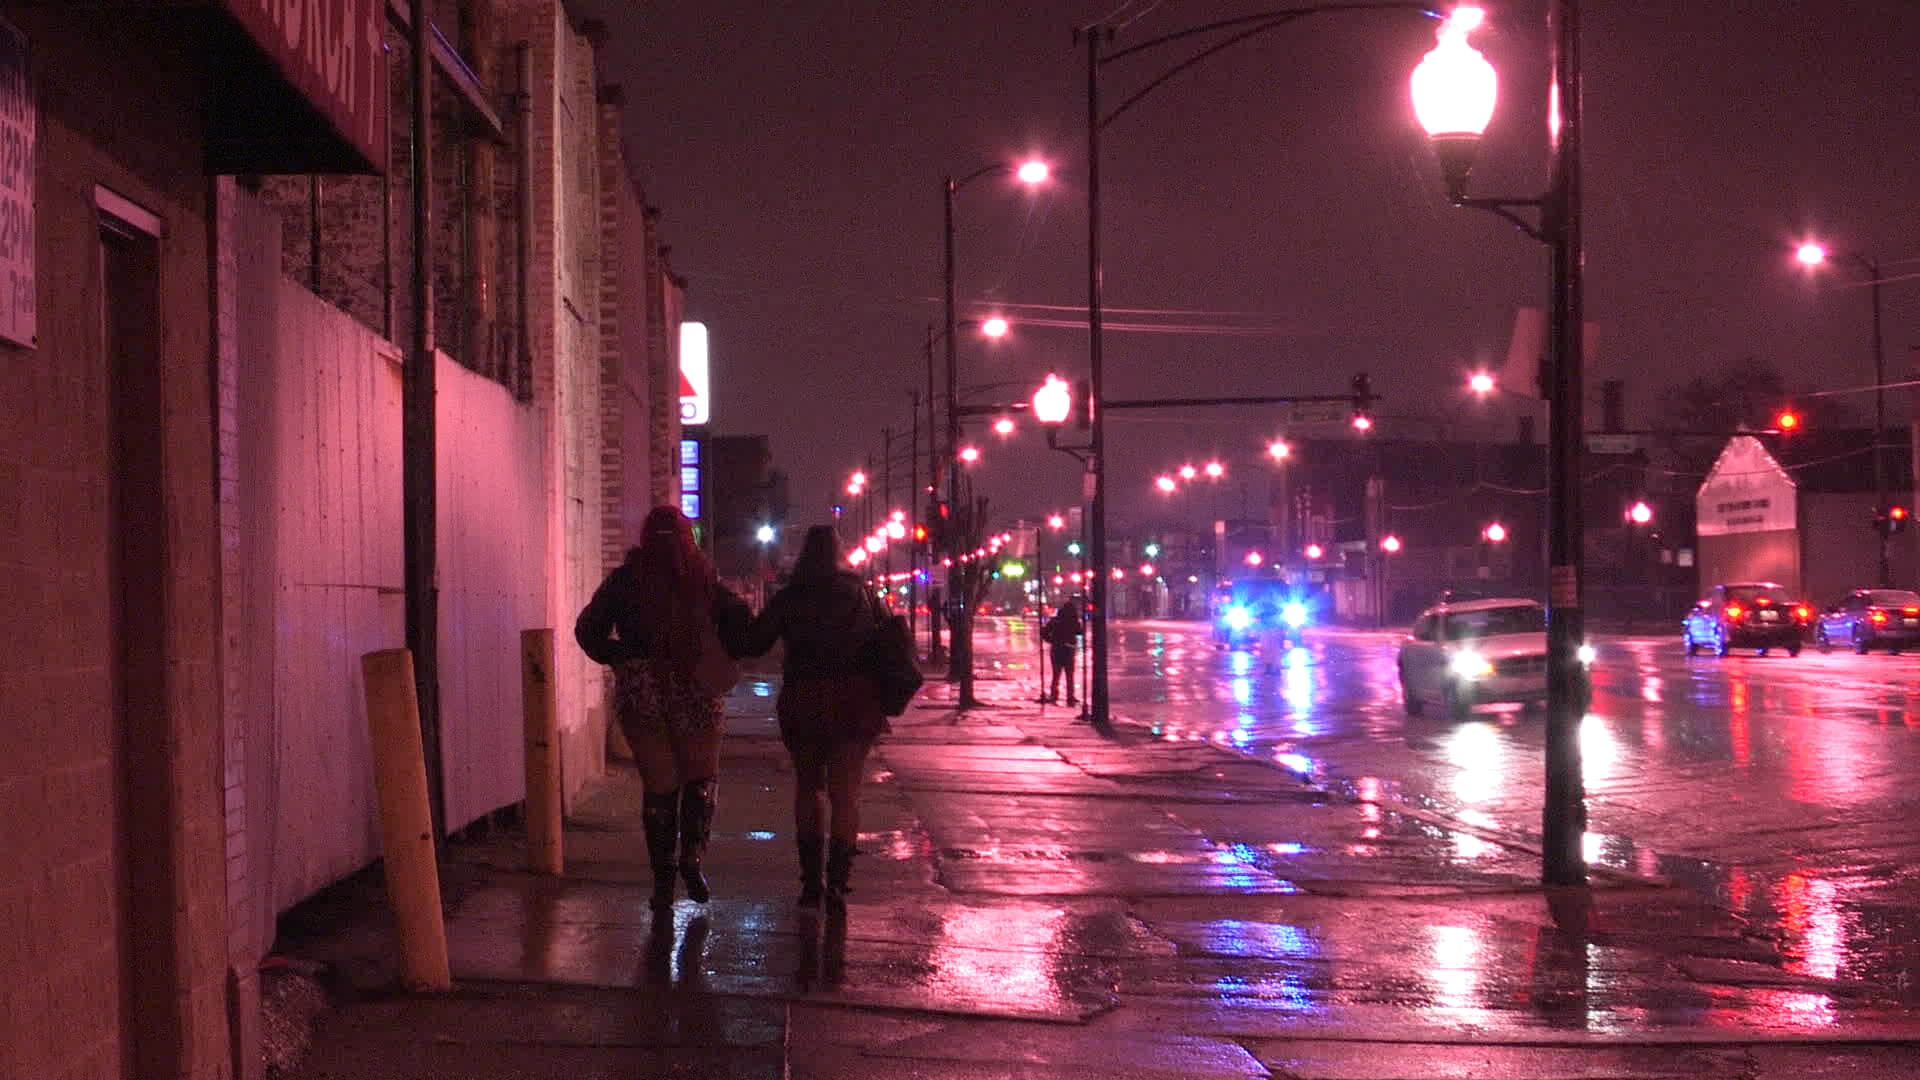 Two people walking in a street at night.